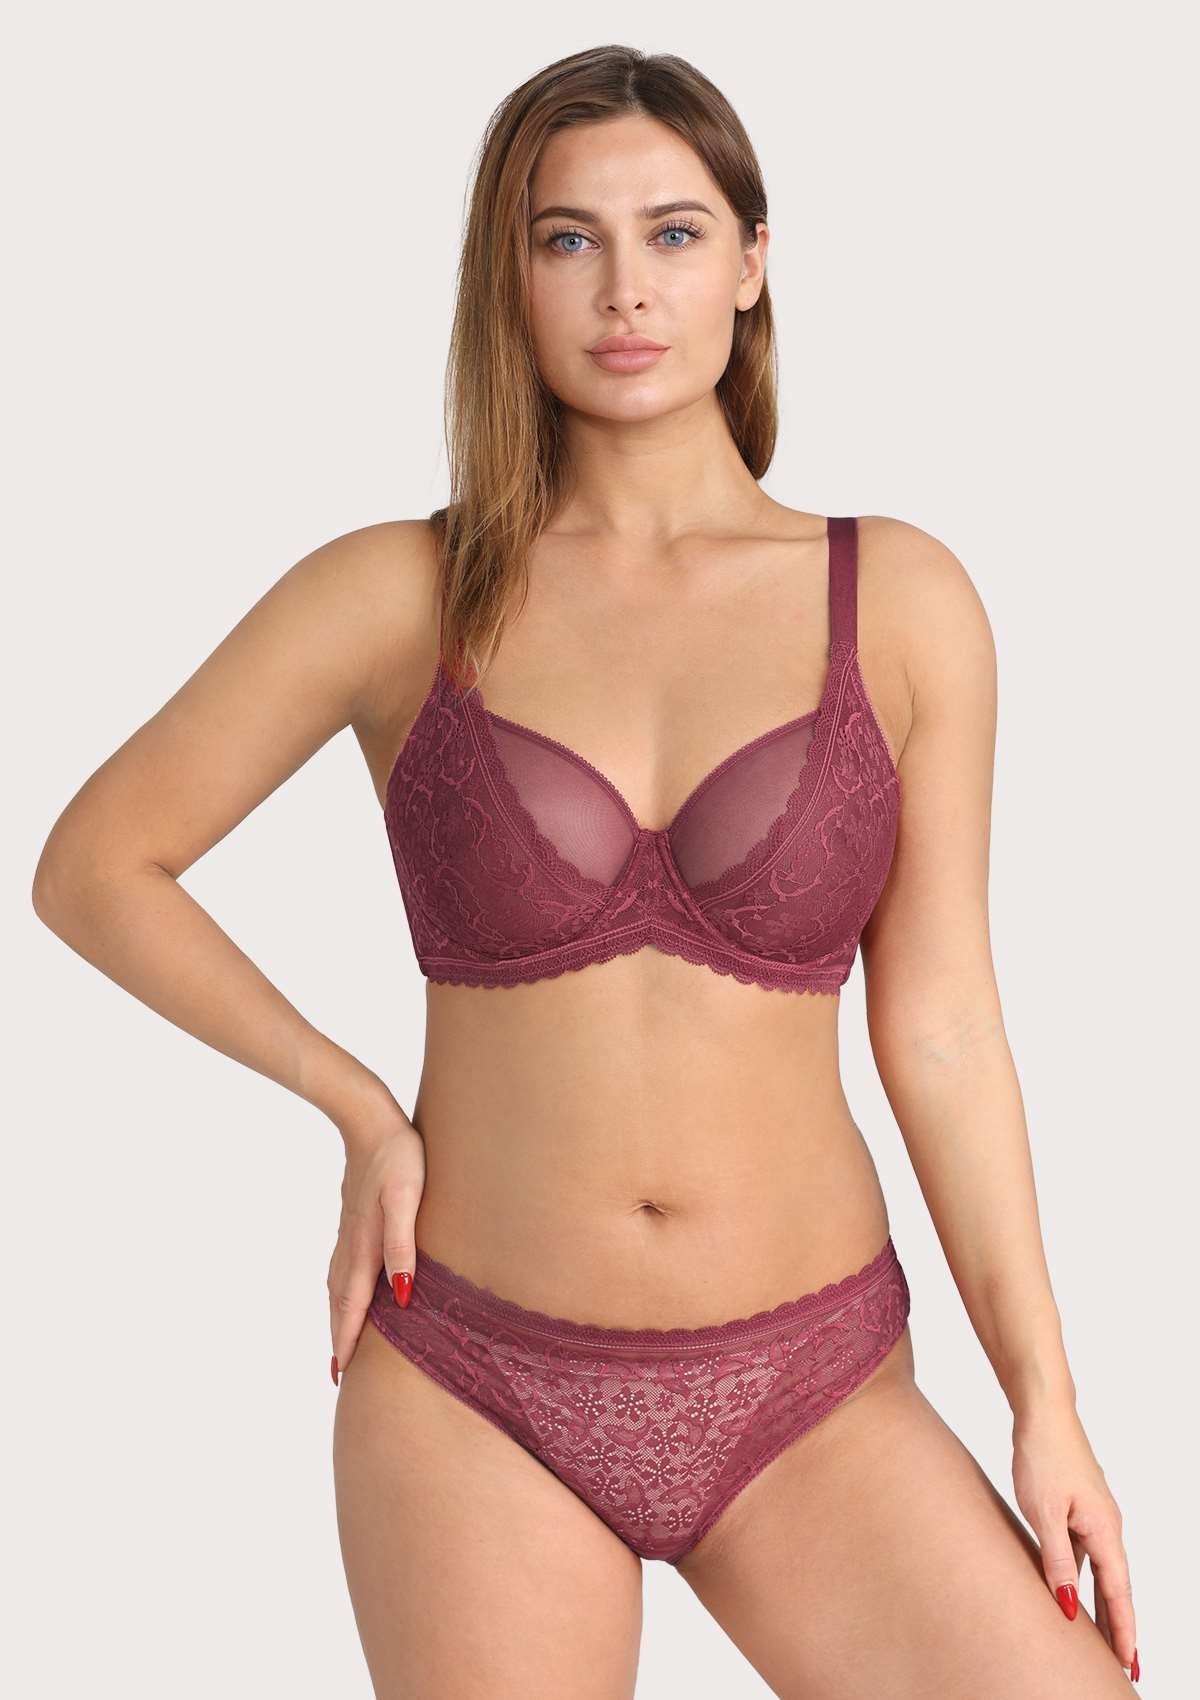 HSIA Anemone Big Bra: Best Bra For Lift And Support, Floral Bra - Burgundy / 40 / DD/E